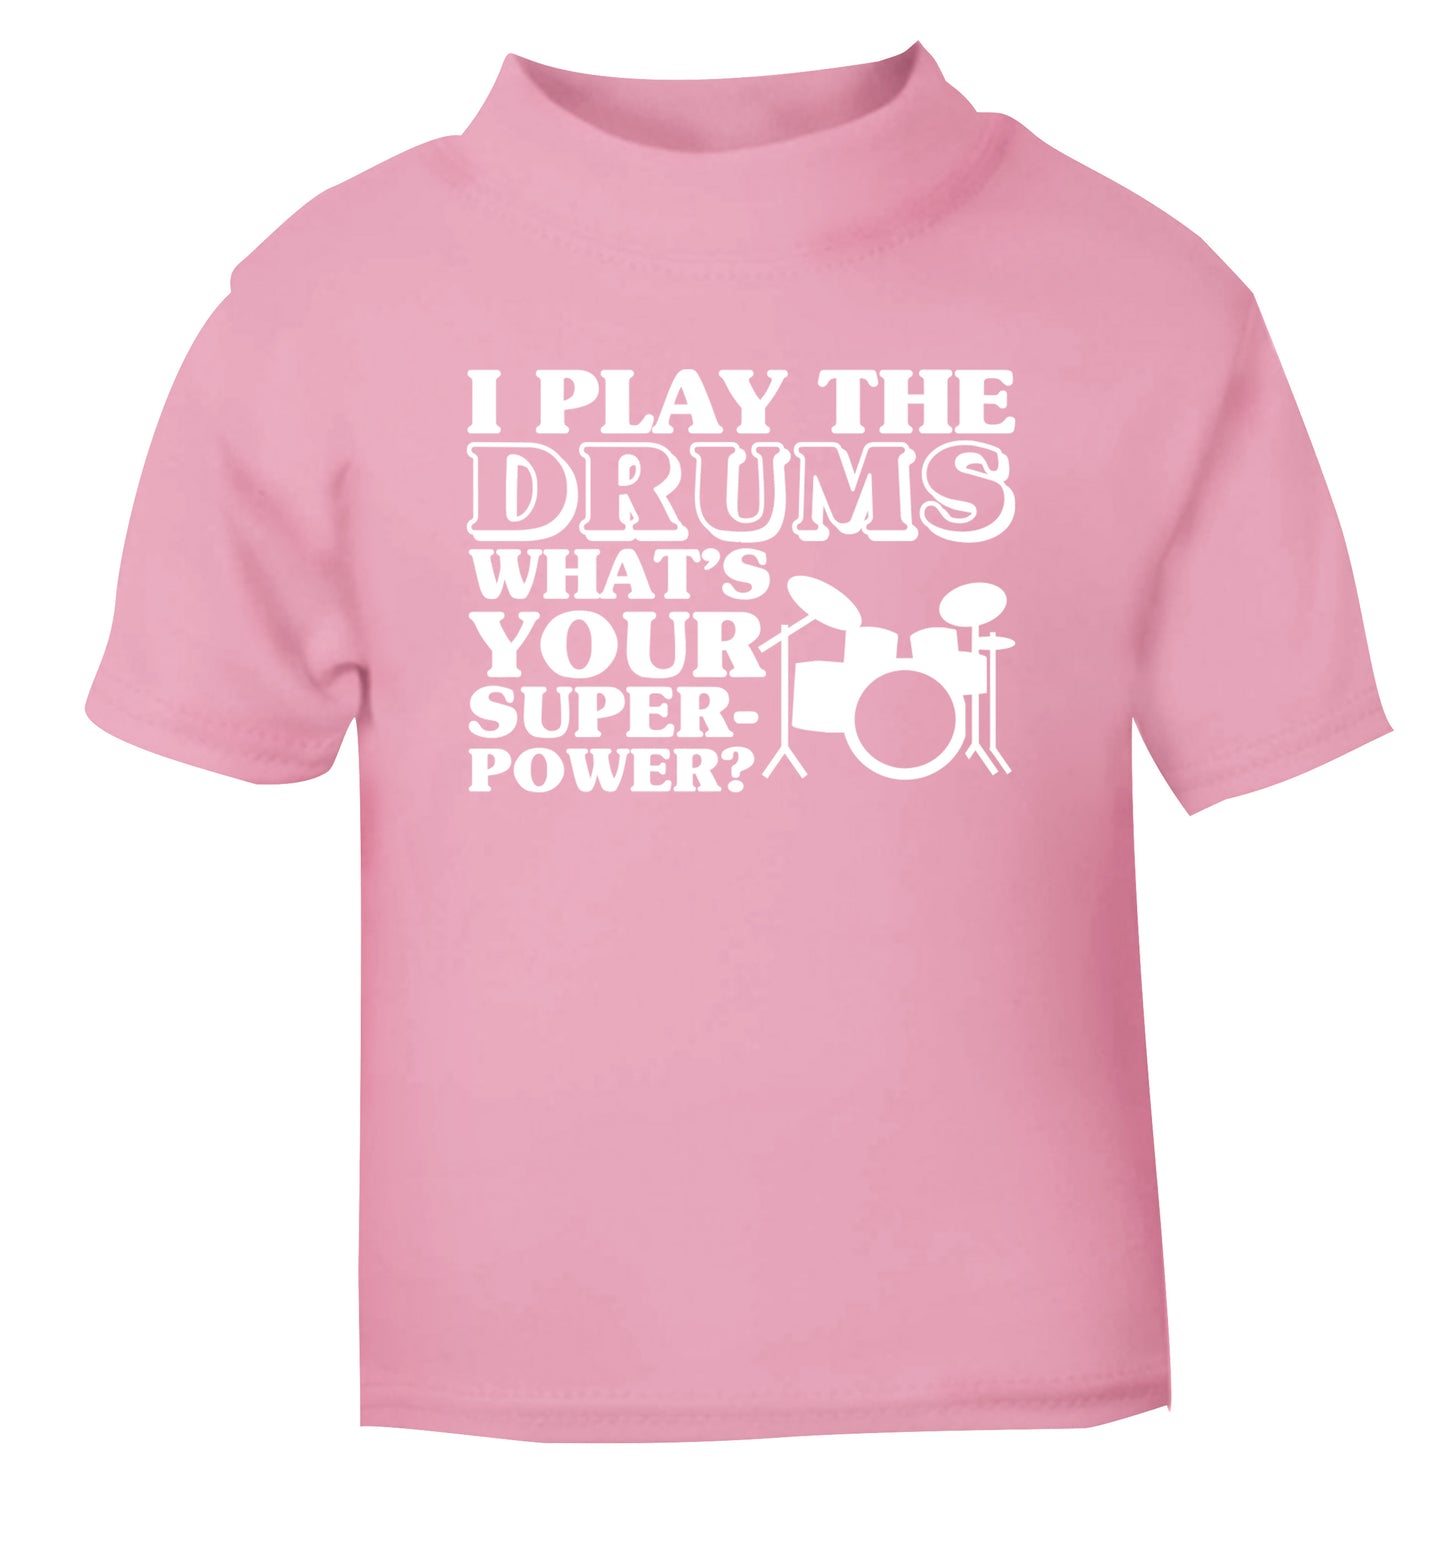 I play the drums what's your superpower? light pink Baby Toddler Tshirt 2 Years